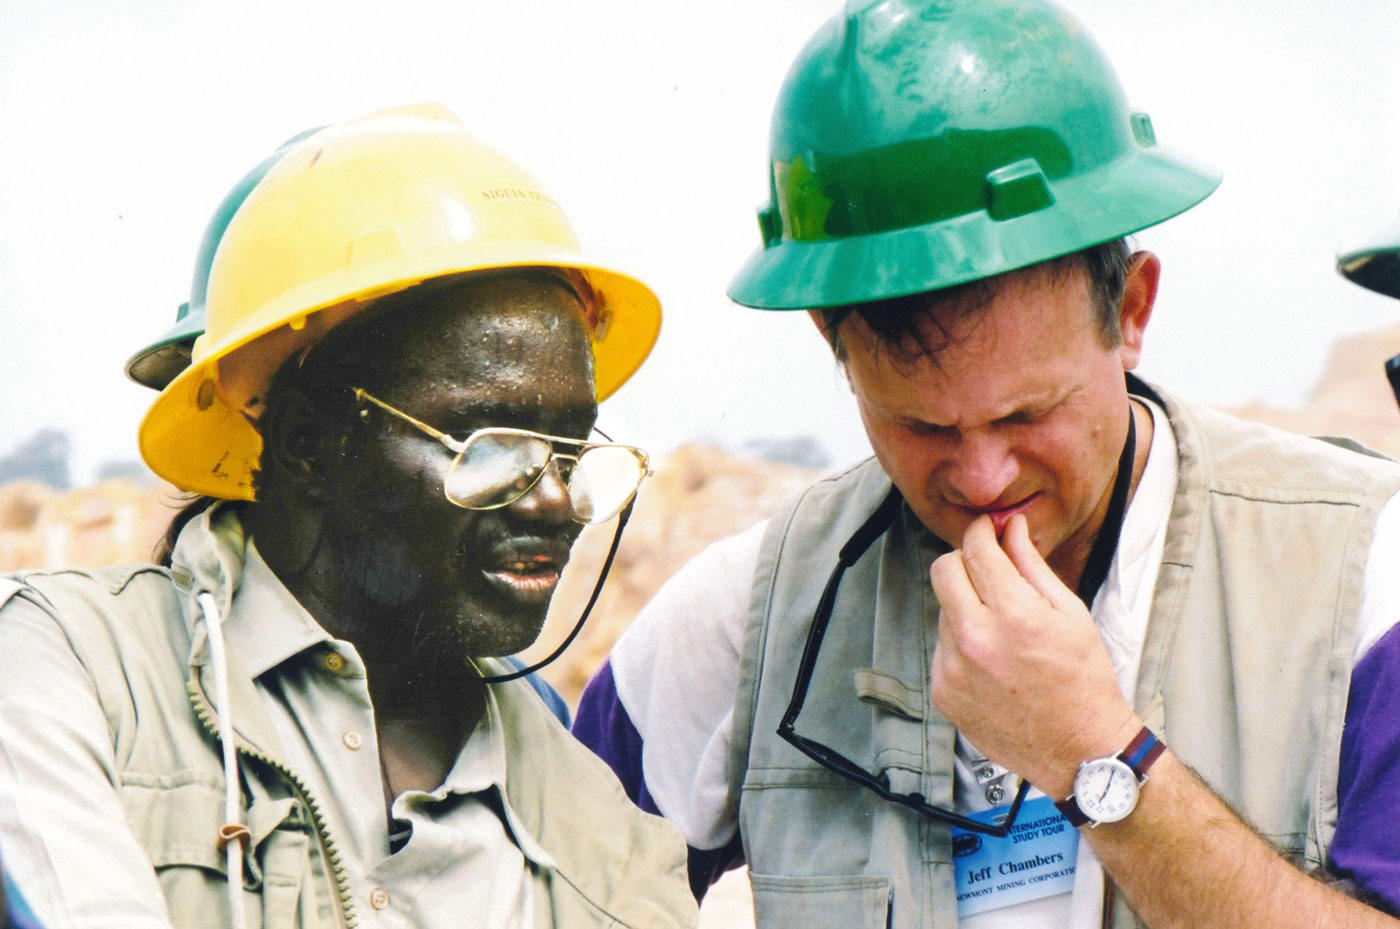 [Siguia Traore of Semos-Anglogold explains some complex aspects of the Sadiola mine, Mali, to Jeff Chambers of Newmont.]